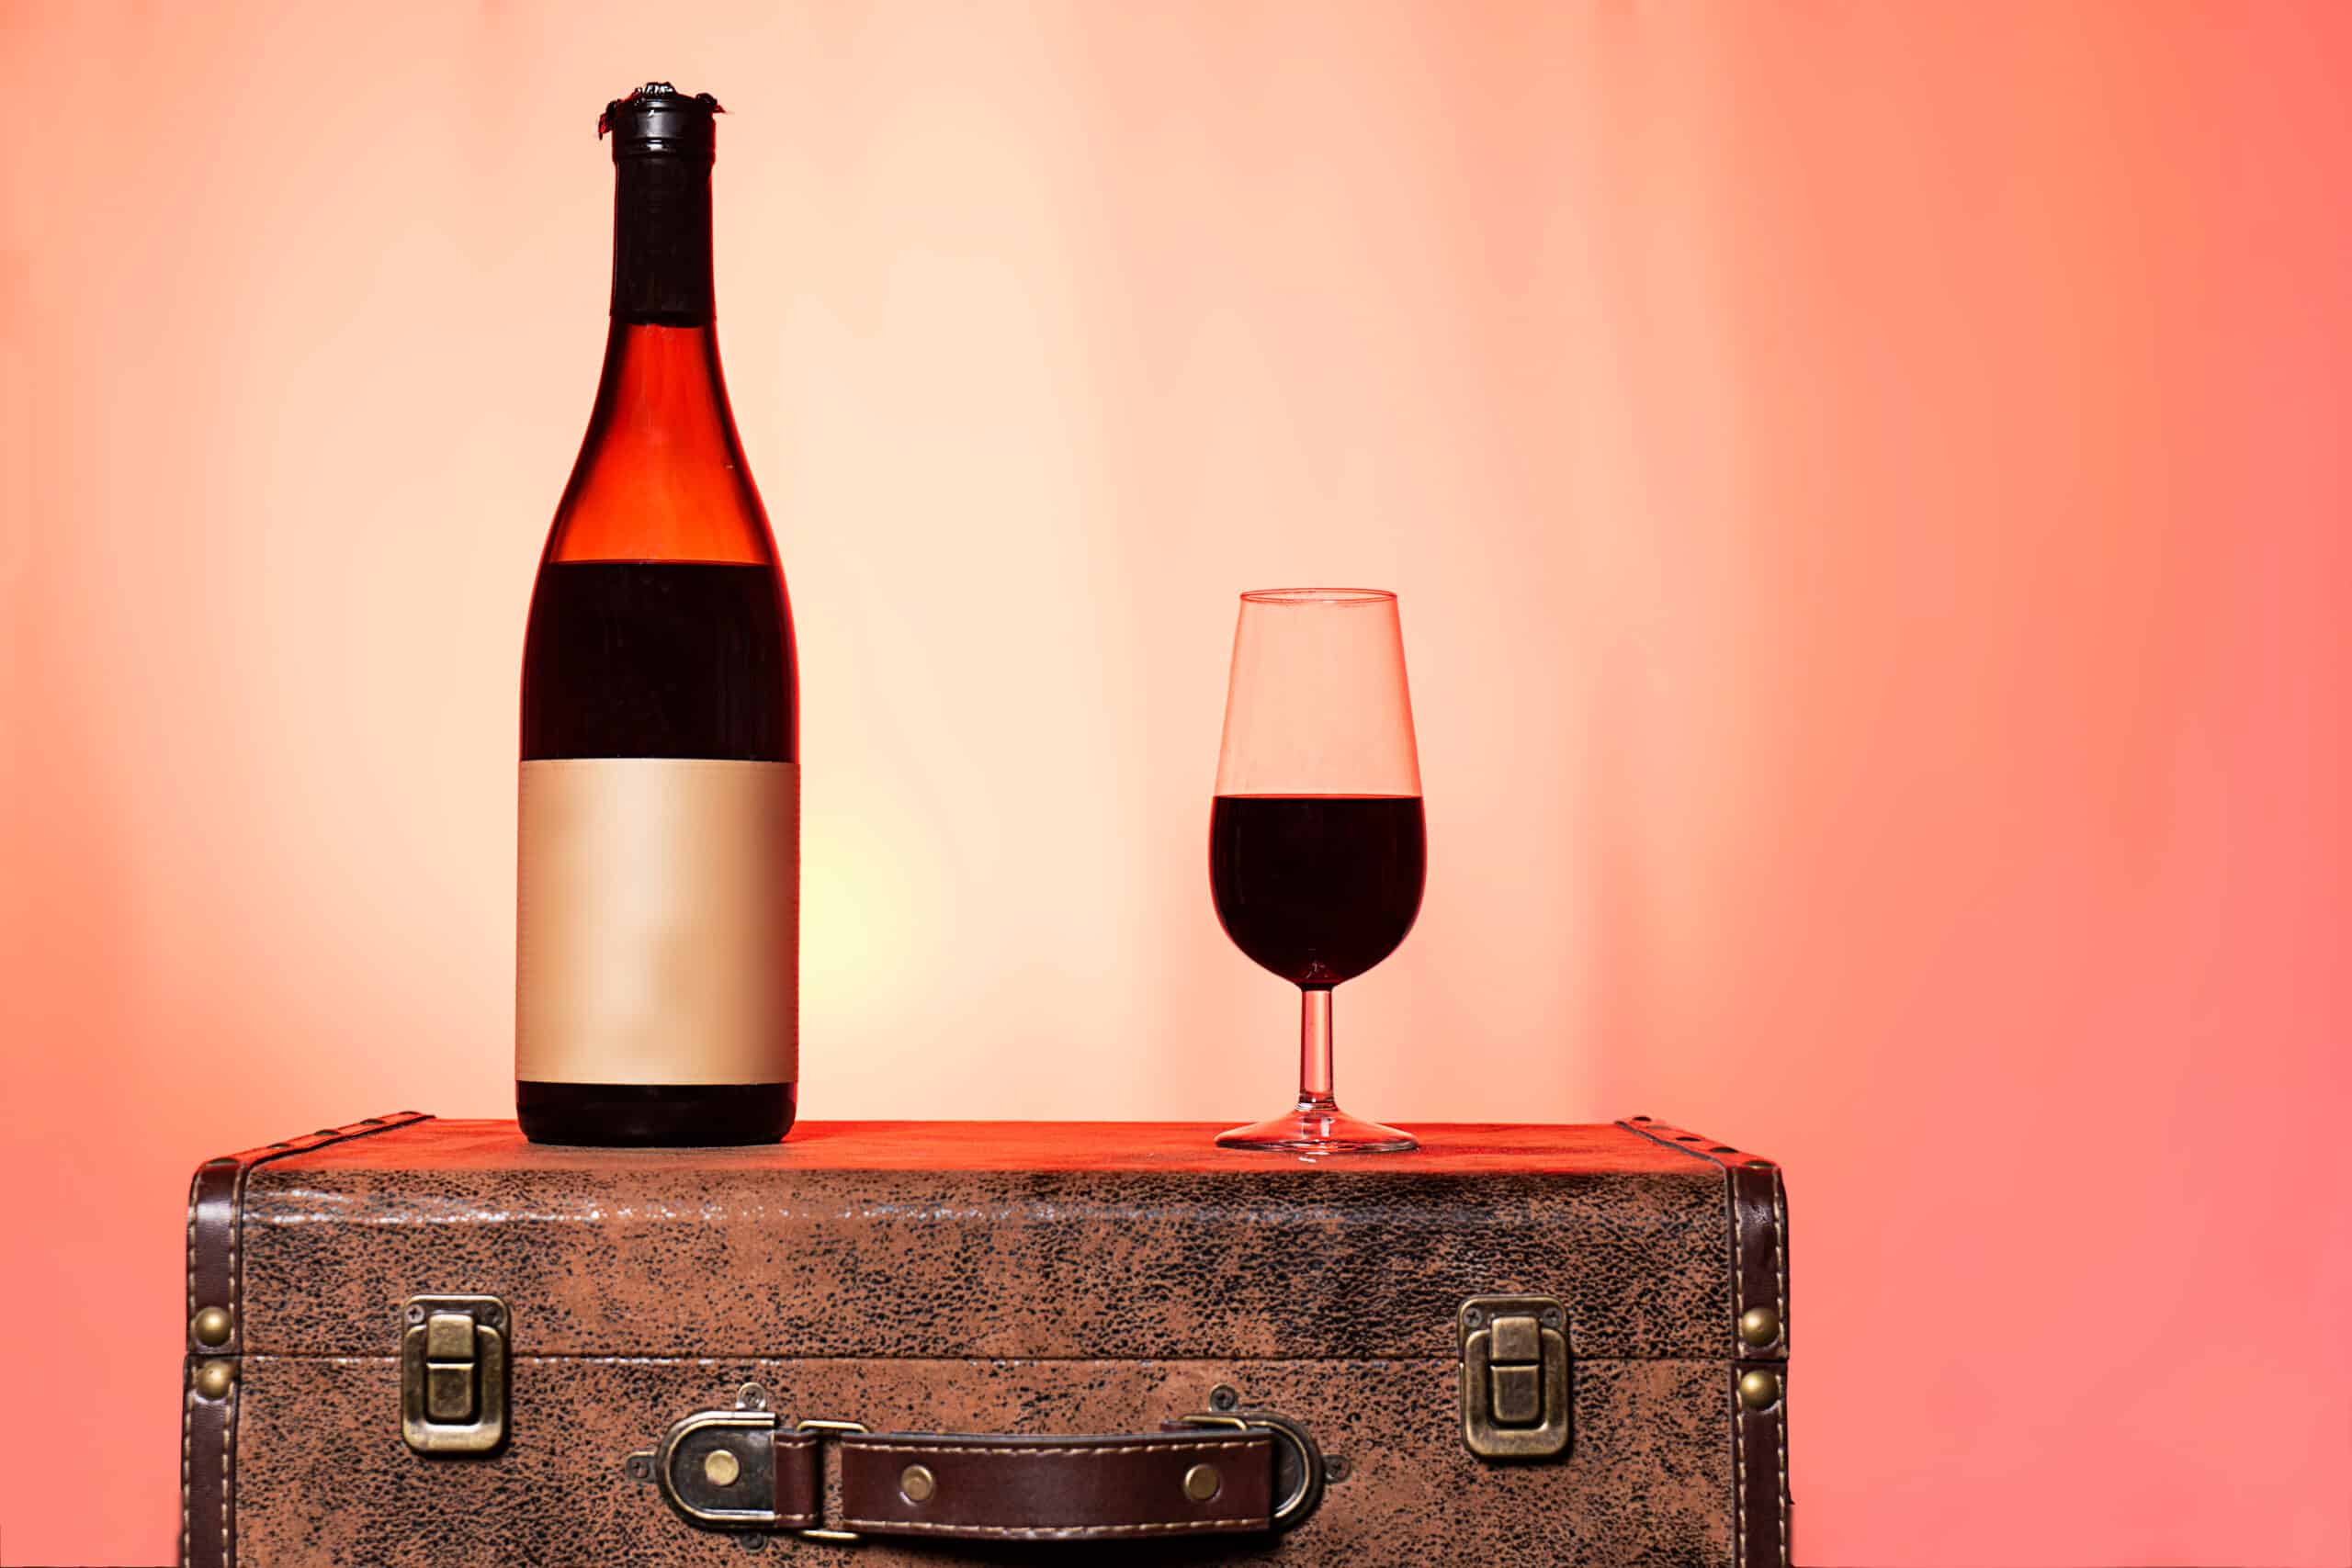 wine bottle and glass on a suitcase